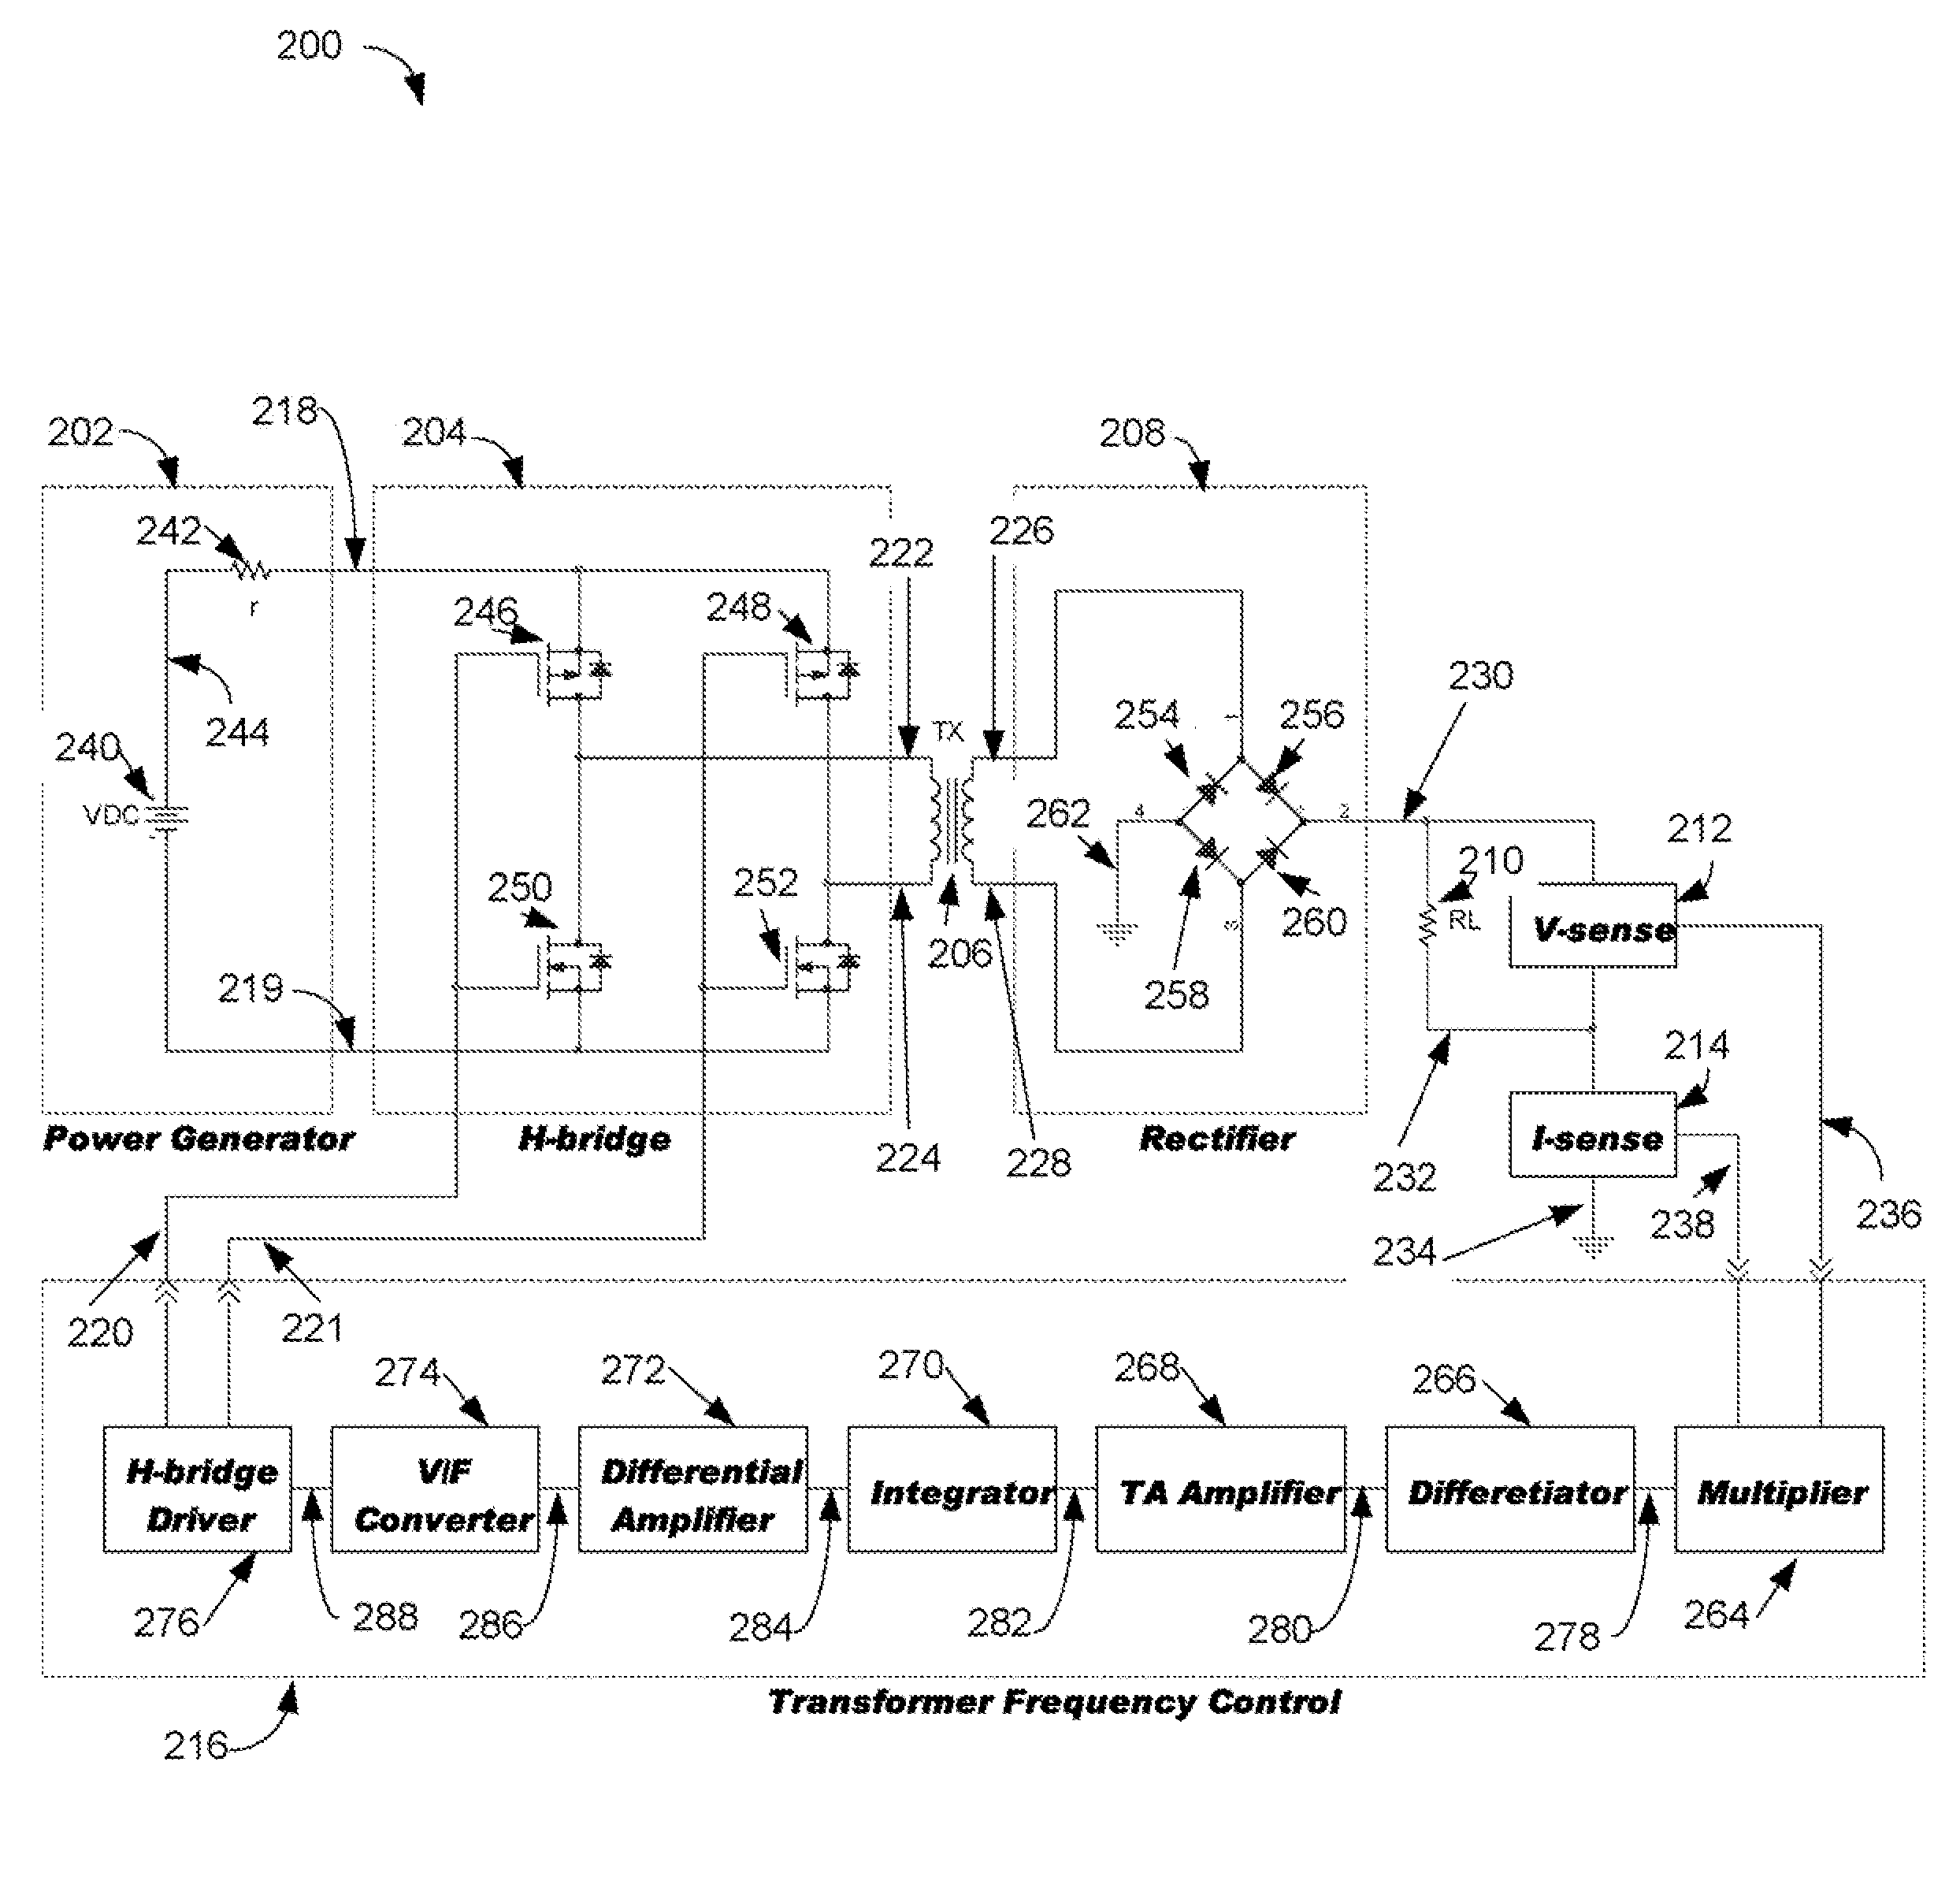 Apparatus and system for transformer frequency control